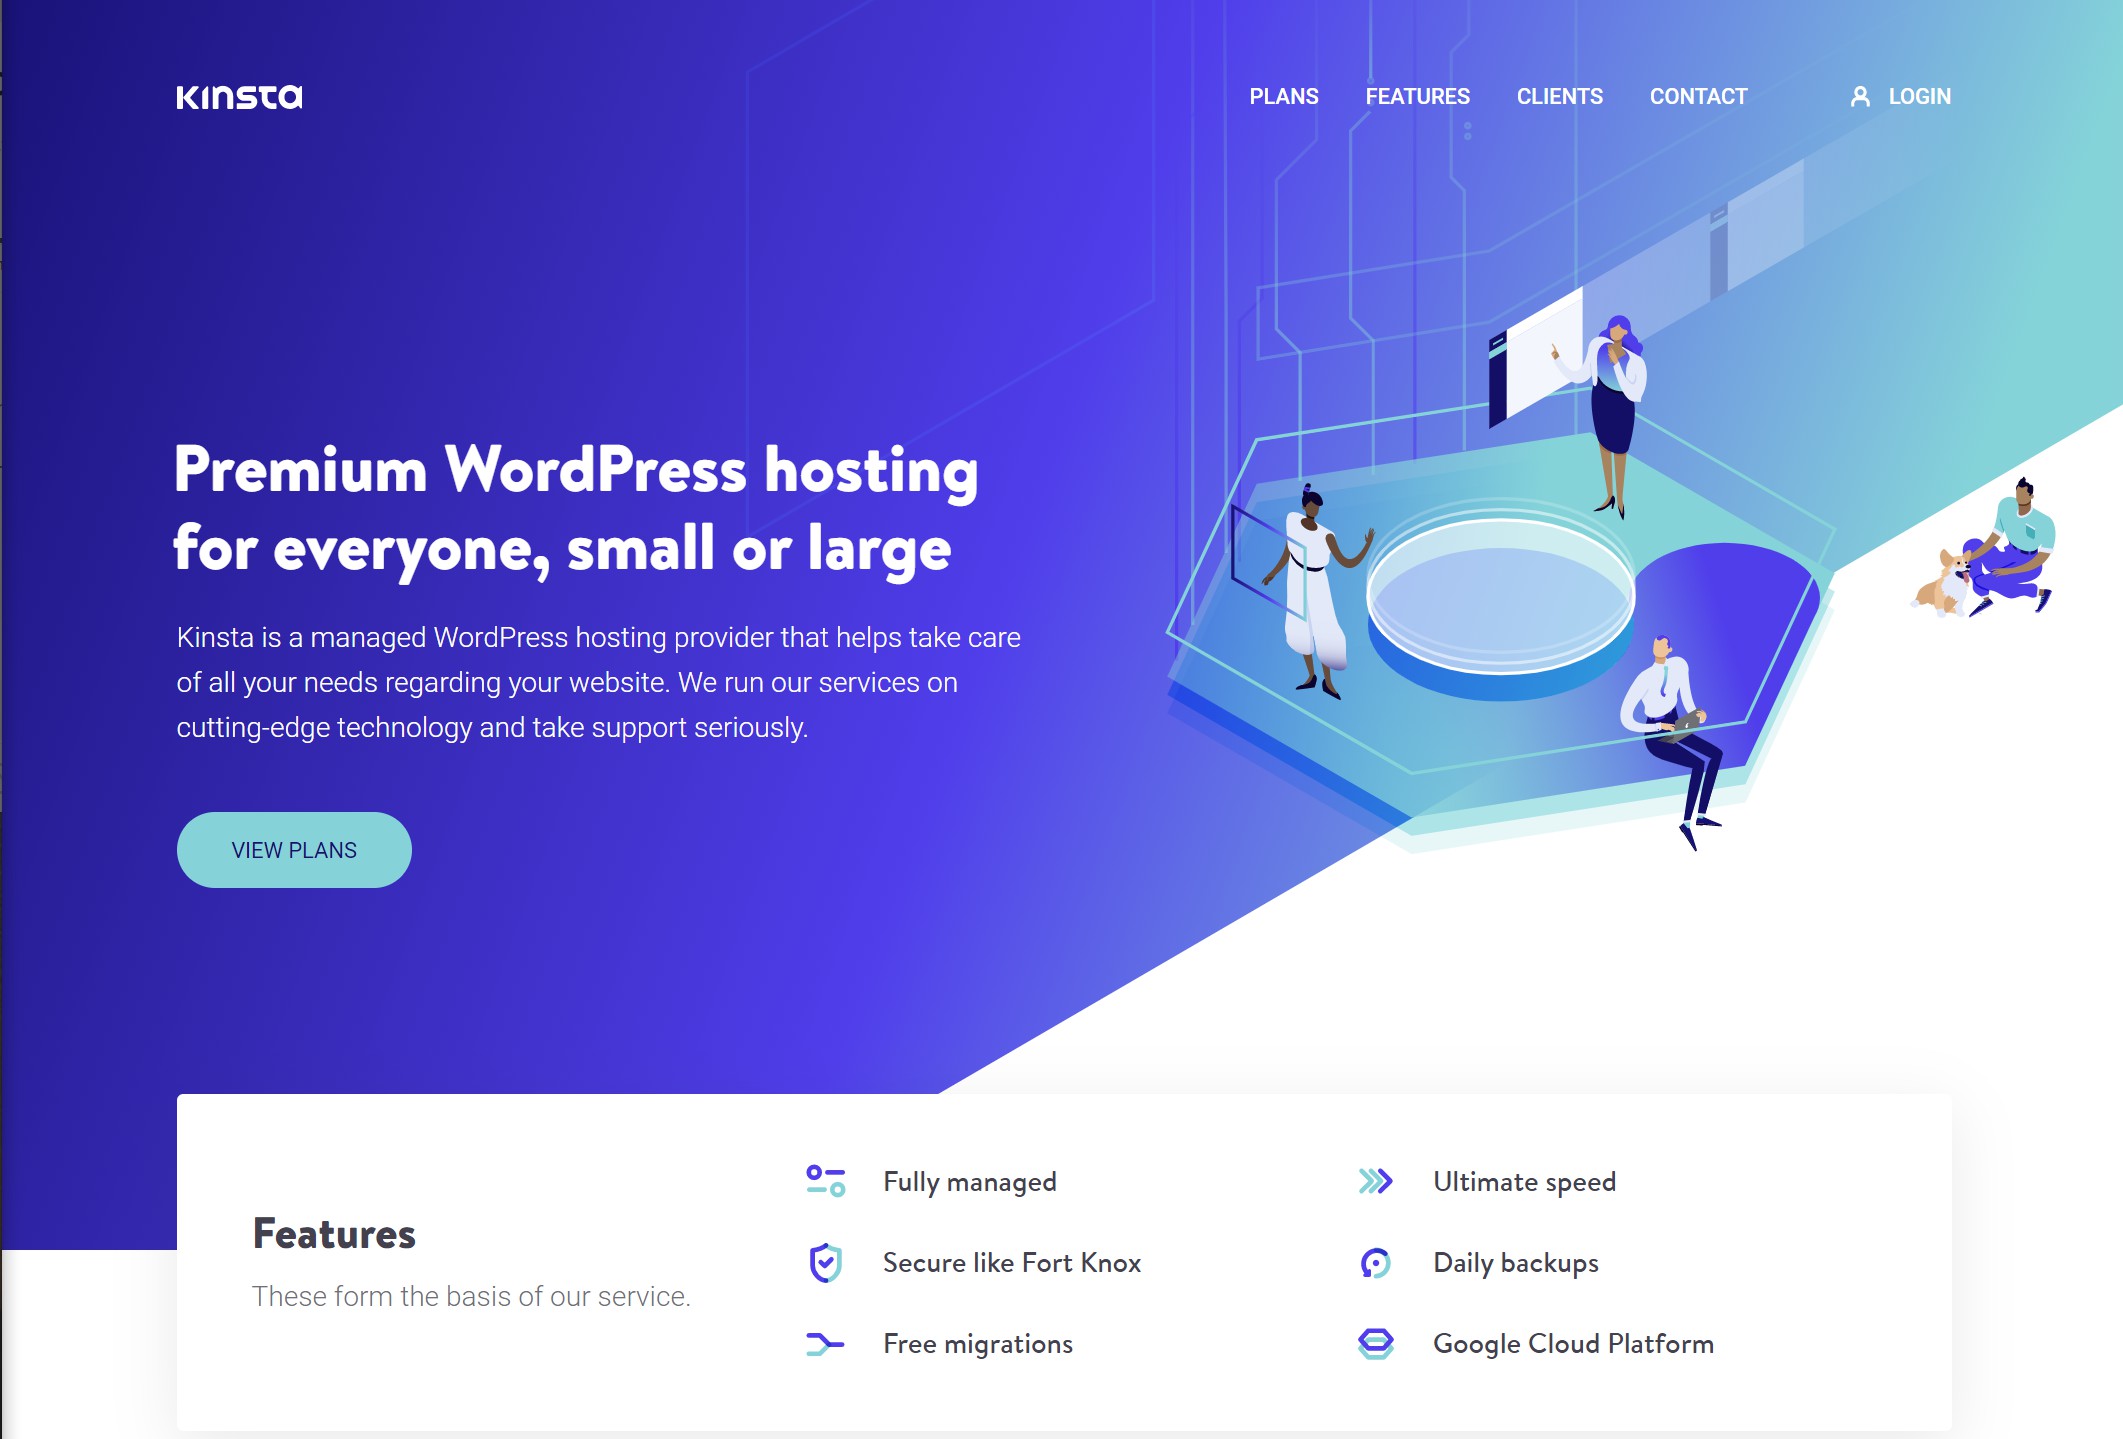 Kinsta is an example of managed WordPress hosting